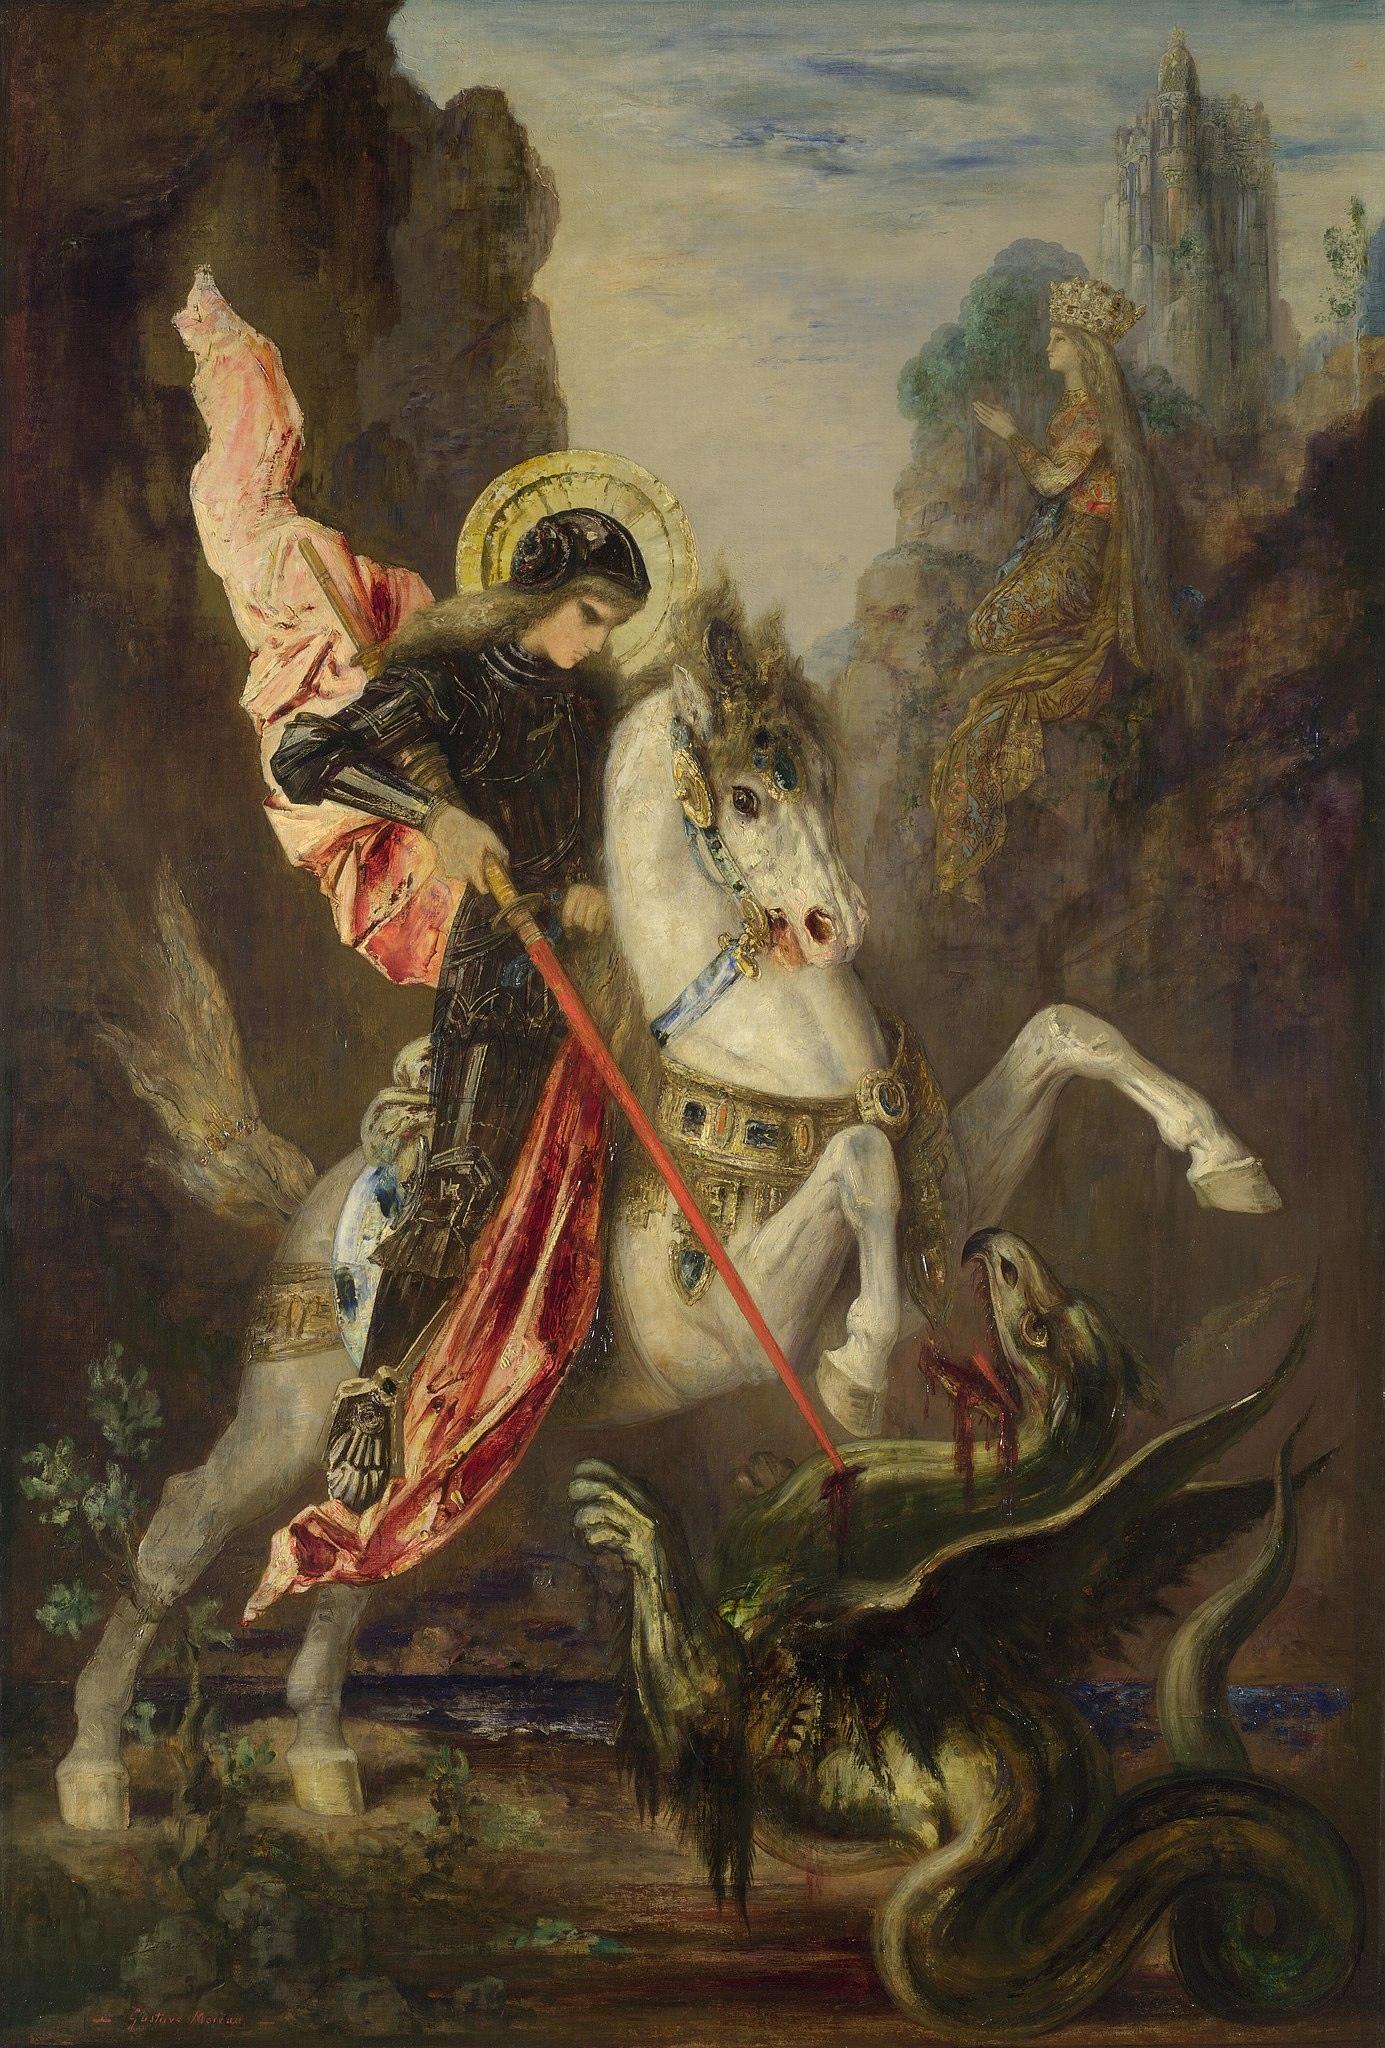 gustave-moreau-st-george-and-dragon-1889-90-oil-canvas-555-x-379-141-x-965-cm-national-gallery.jpg